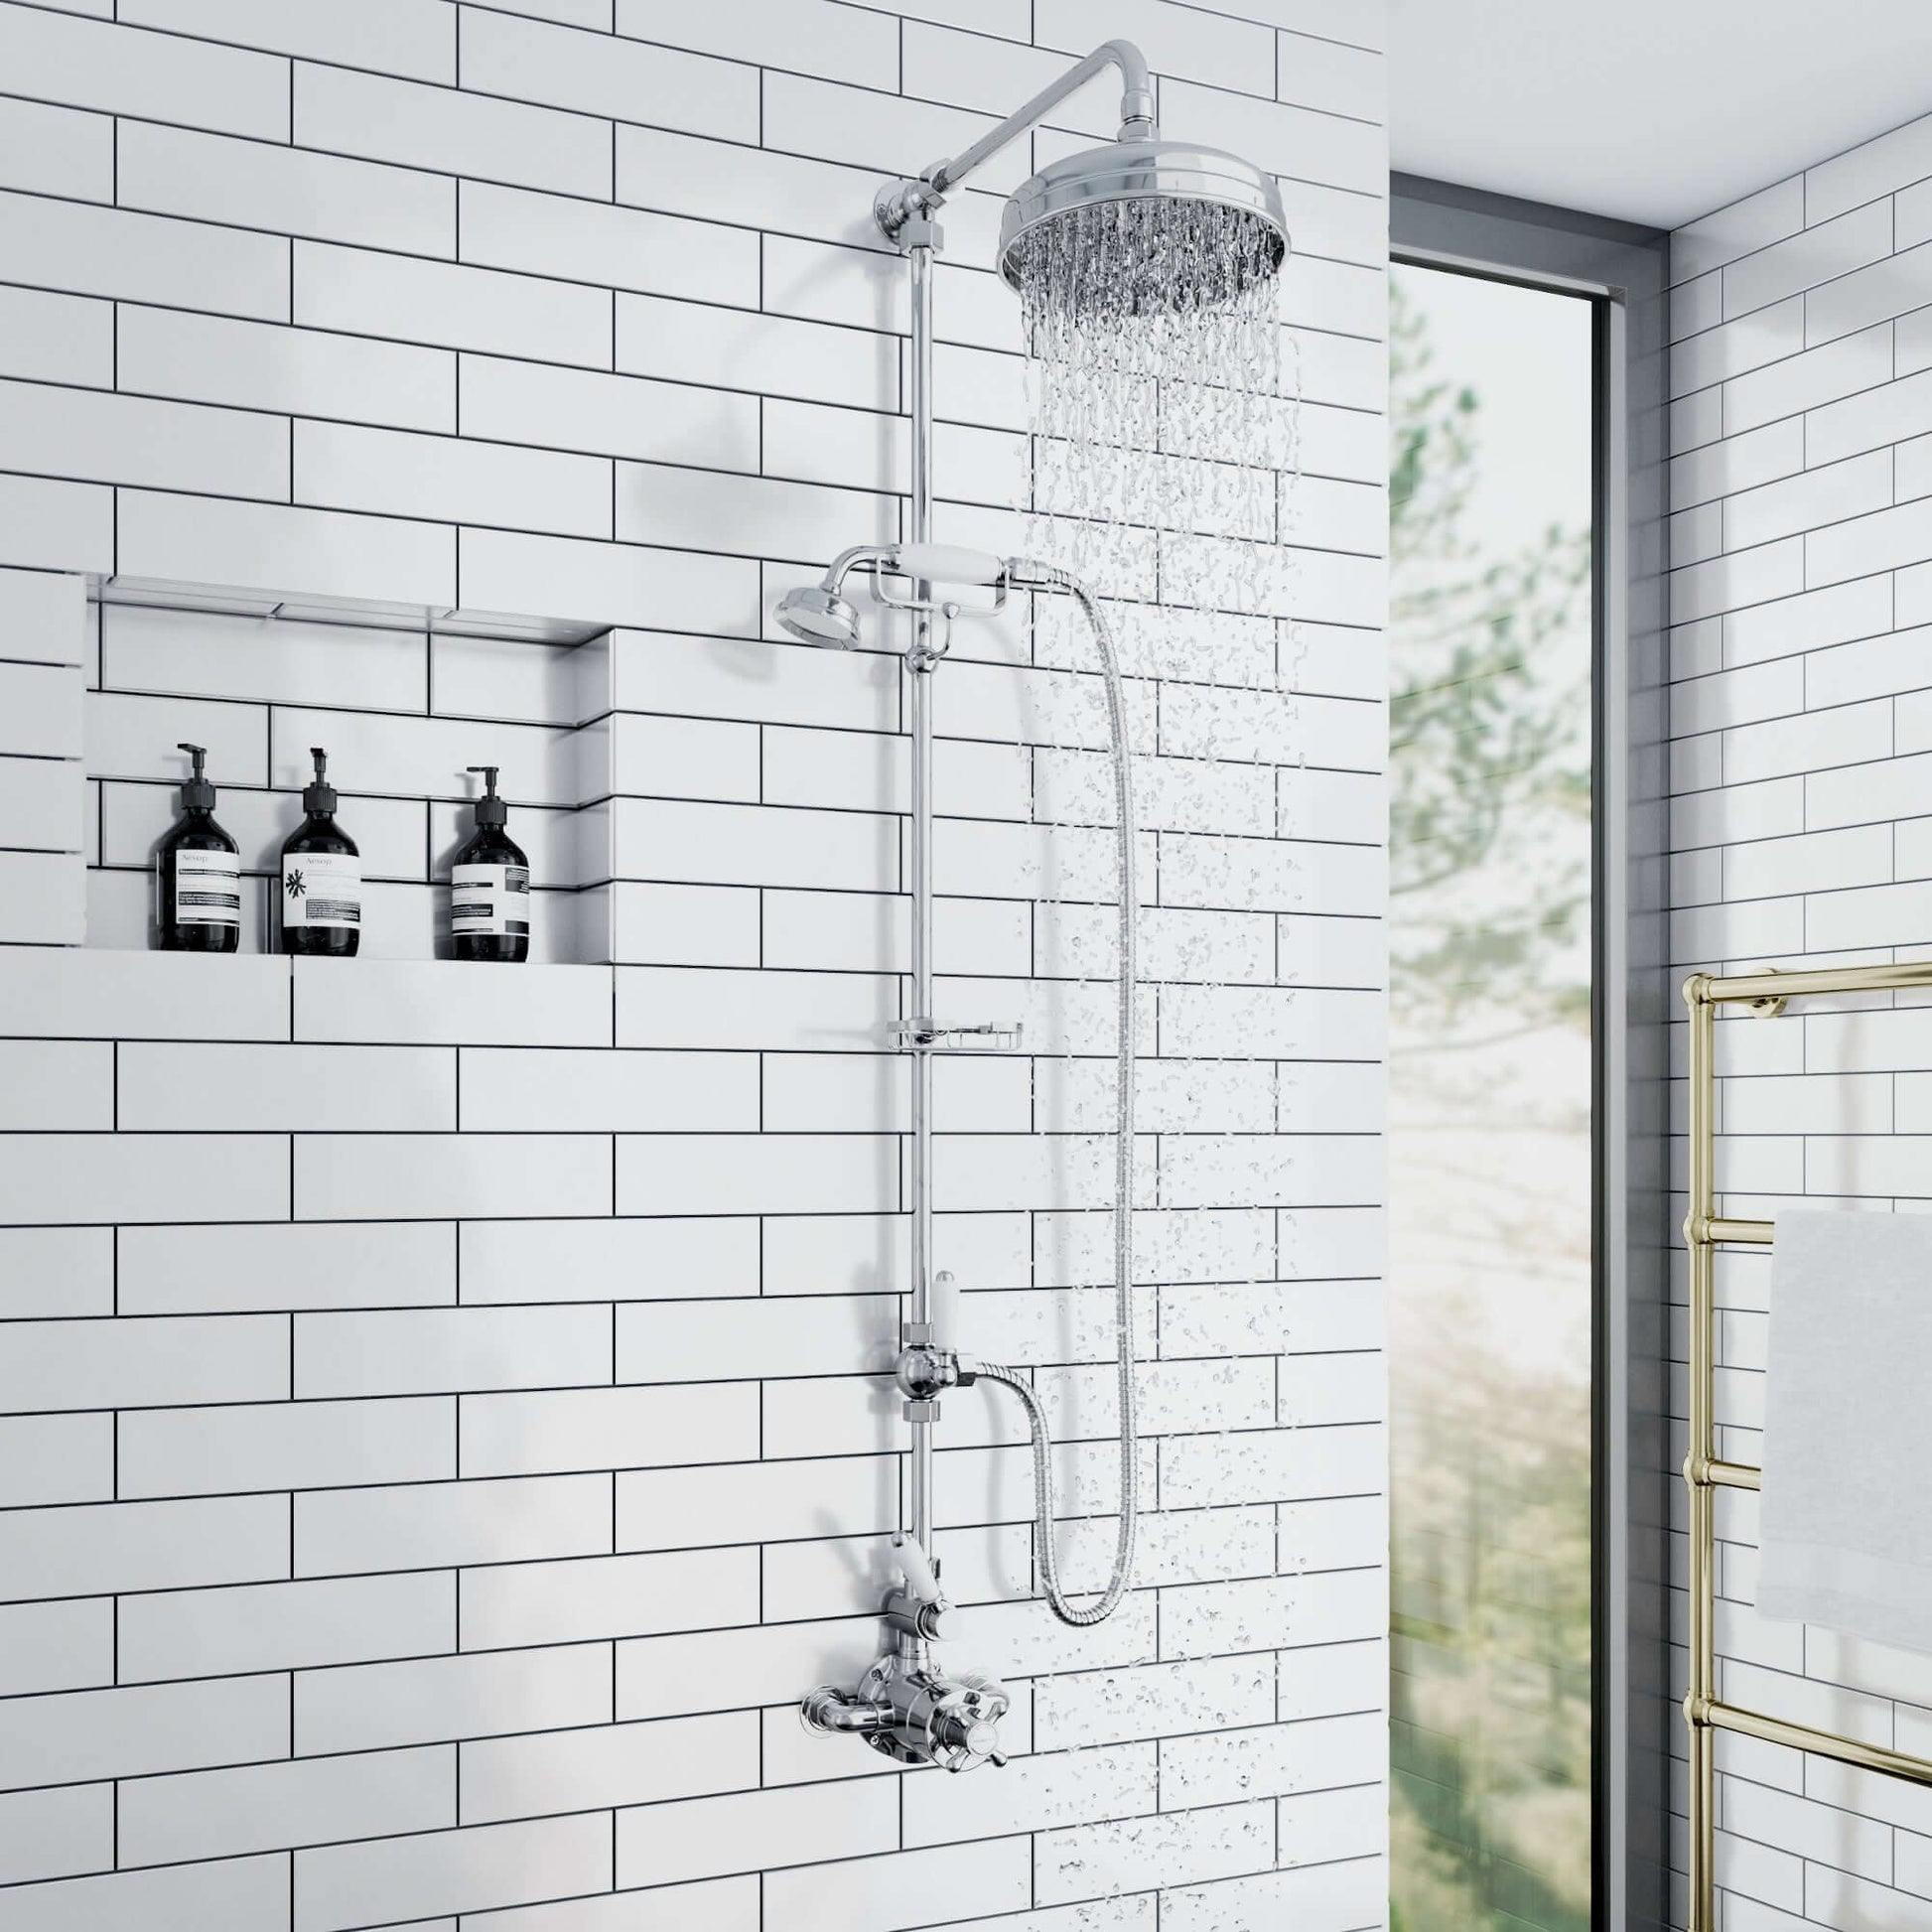 Downton Exposed Traditional Thermostatic Shower Set 2 Outlet Incl. Twin Shower Valve With Diverter, Rigid Riser Rail, 200mm Shower Head, Telephone Style Ceramic Handset & Caddy - Chrome And White - Showers